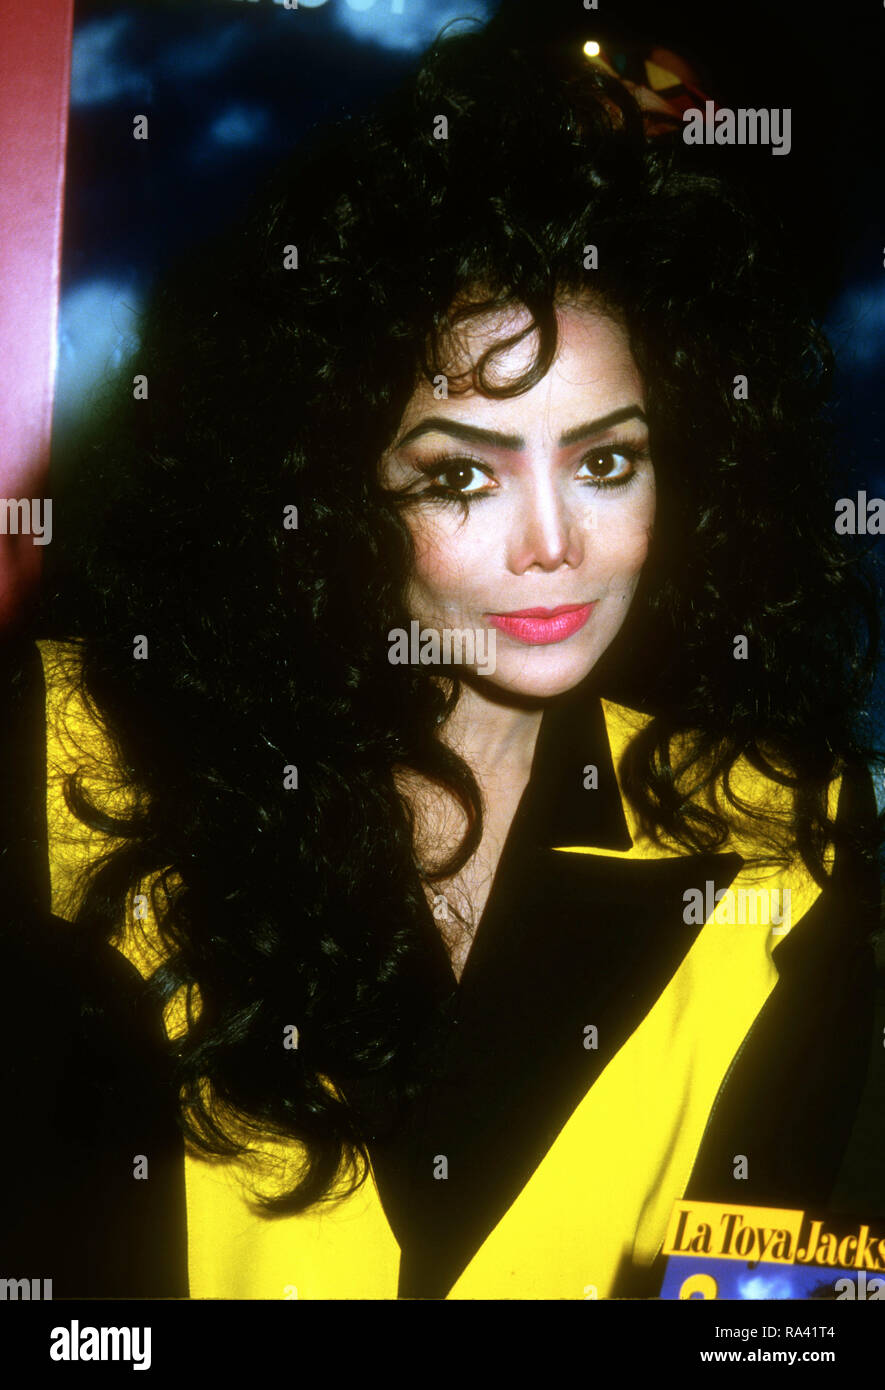 LAS VEGAS, NV - JULY 12: Singer LaToya Jackson attends the 12th Annual Video Software Dealers Association (VSDA) Convention and Expo on July 12, 1993 at the Las Vegas Convention Center in Las Vegas, Nevada. Photo by Barry King/Alamy Stock Photo Stock Photo